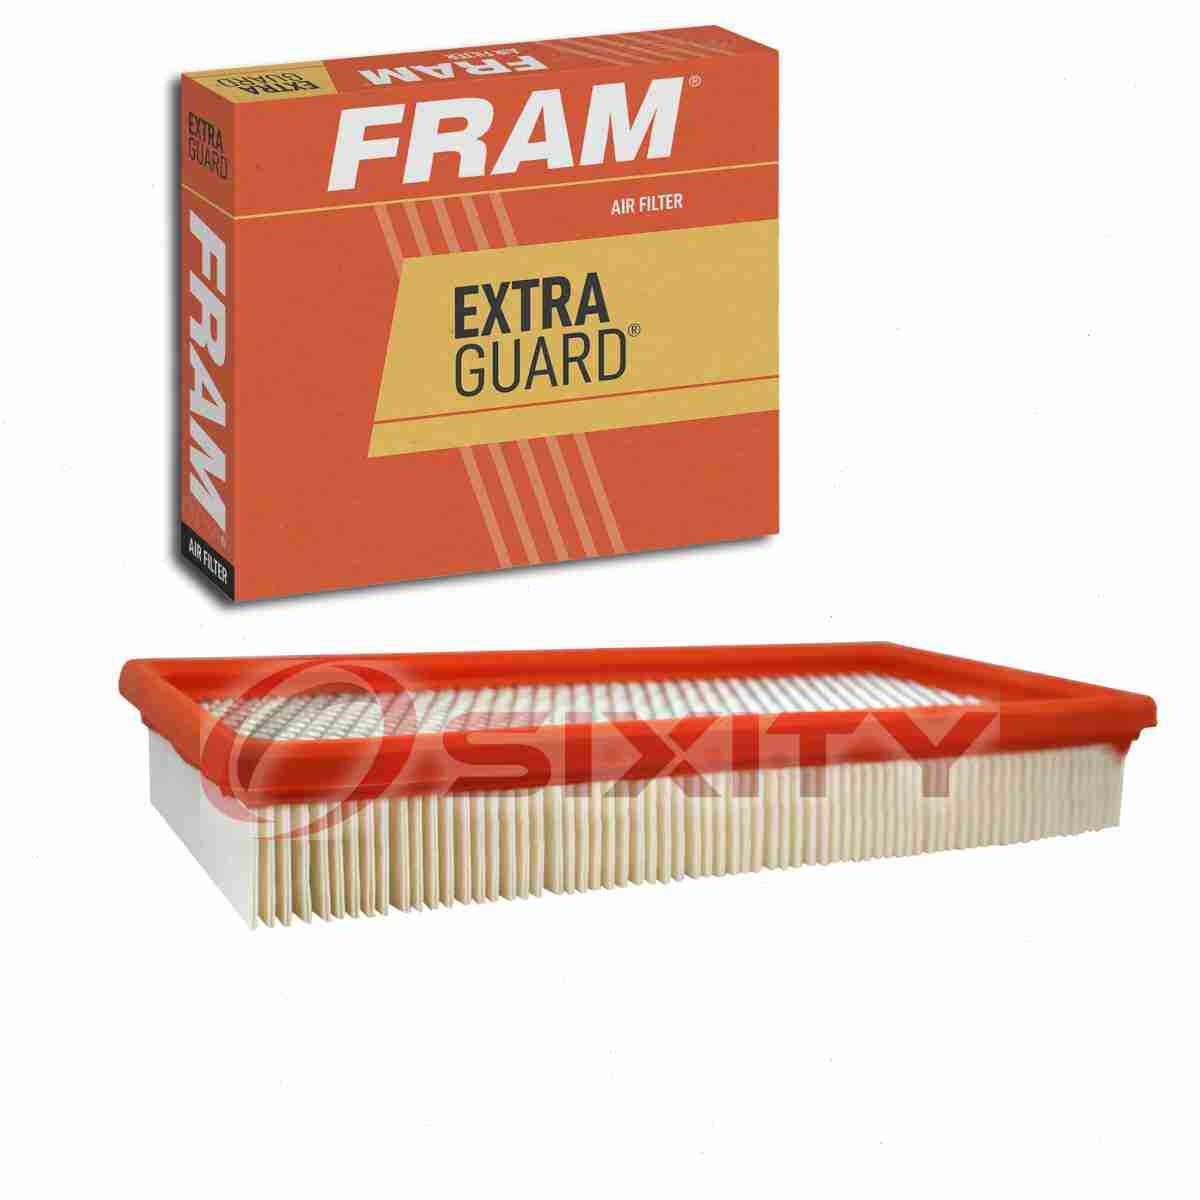 FRAM Extra Guard Air Filter for 1992-1994 Plymouth Sundance Intake Inlet sh